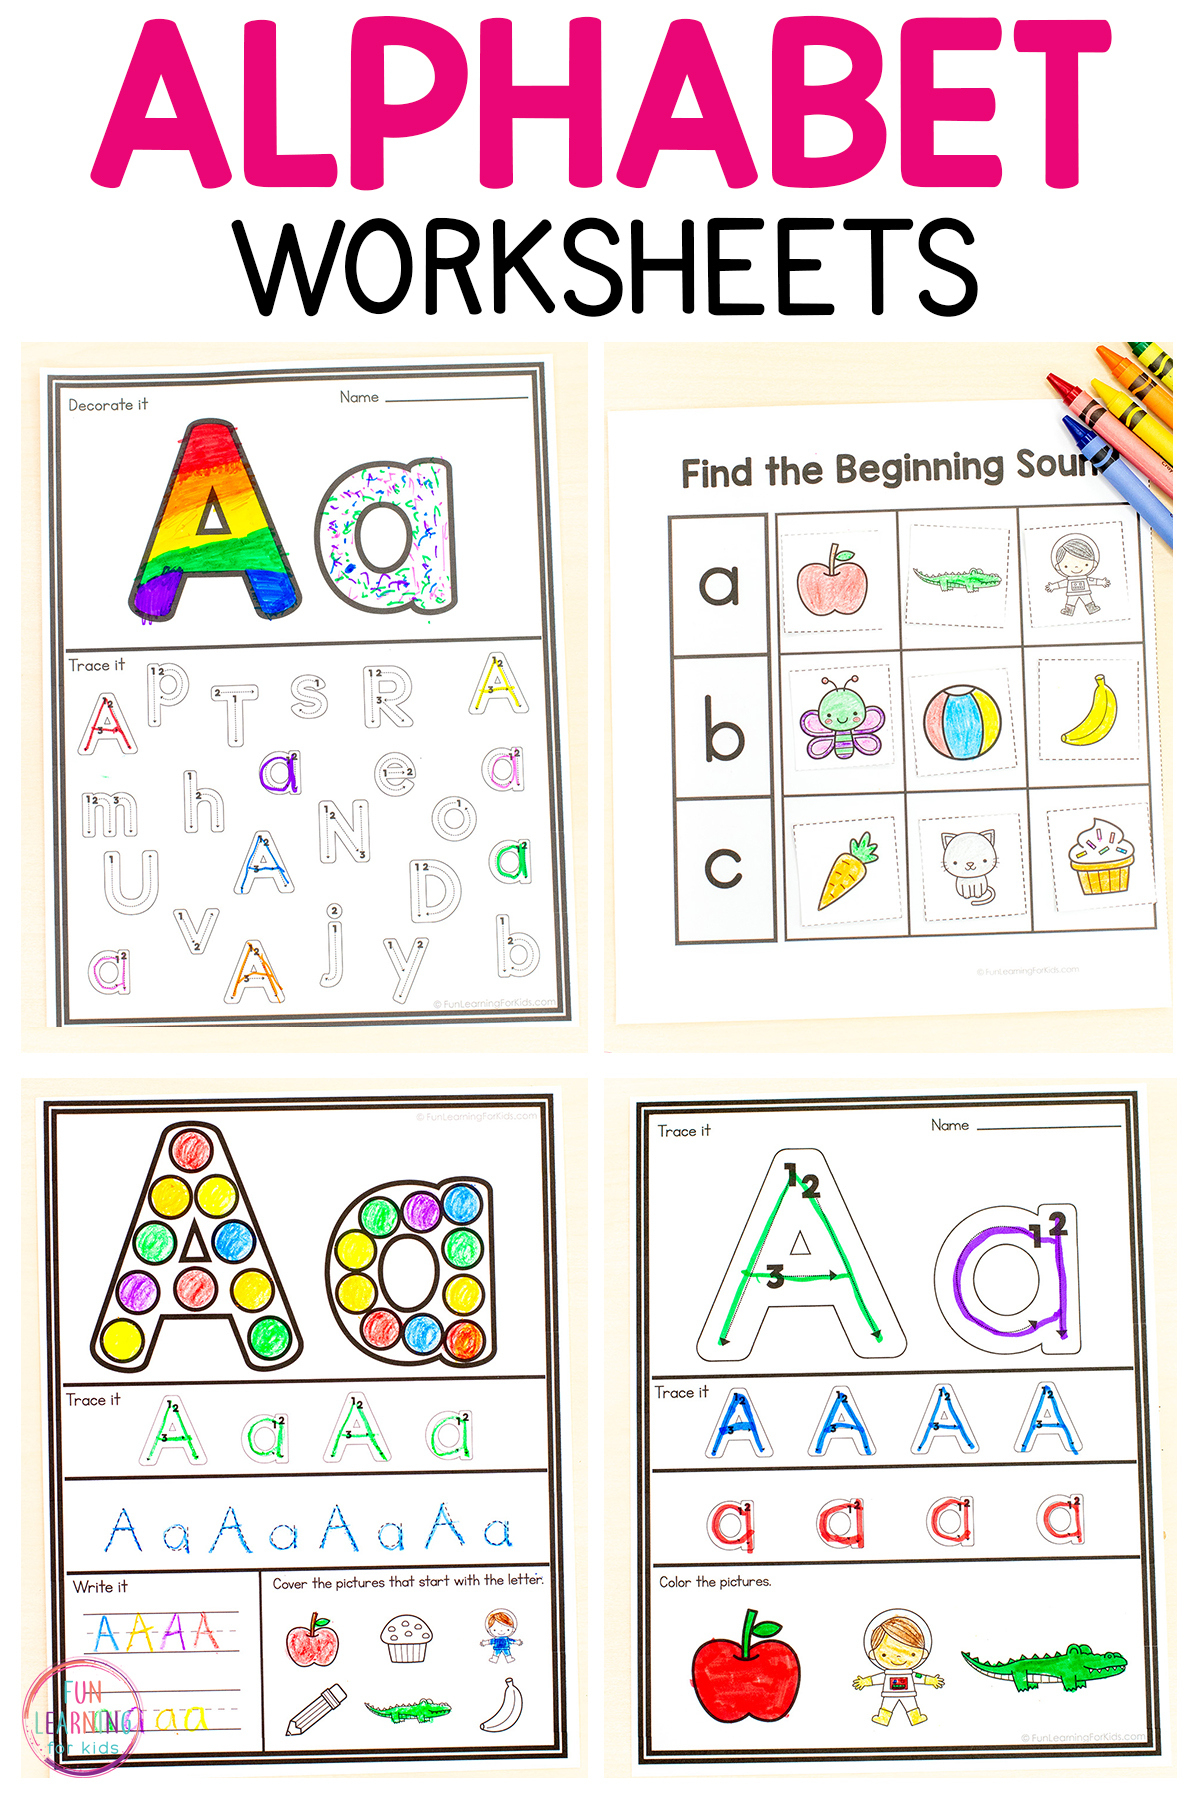 Alphabet Worksheets intended for Free Printable Alphabet Activities For Preschoolers